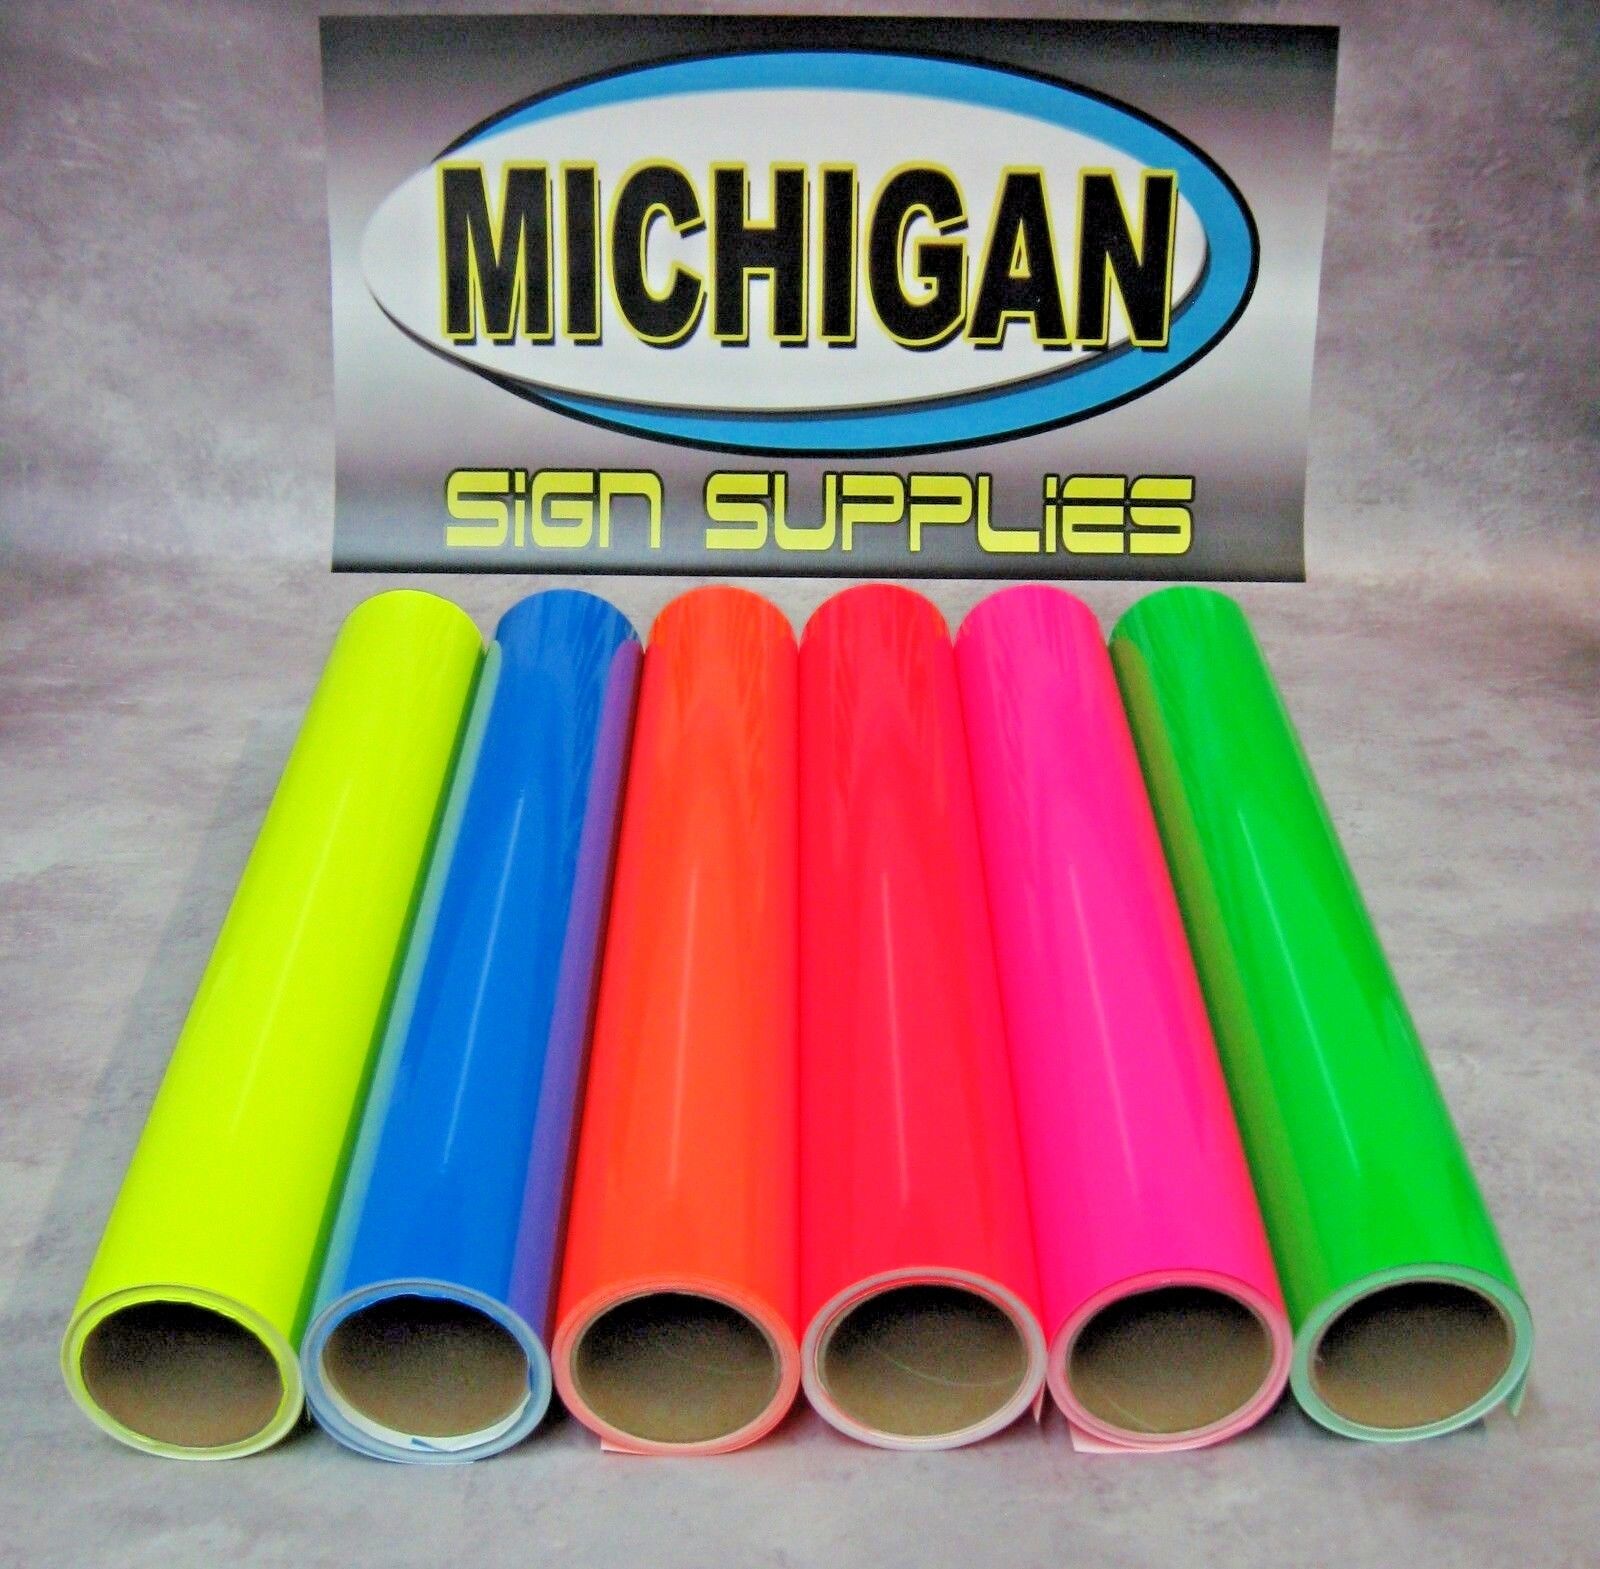 Cast Fluorescent Vinyl-Great for Decals, Race Cars & More-6 Colors Available